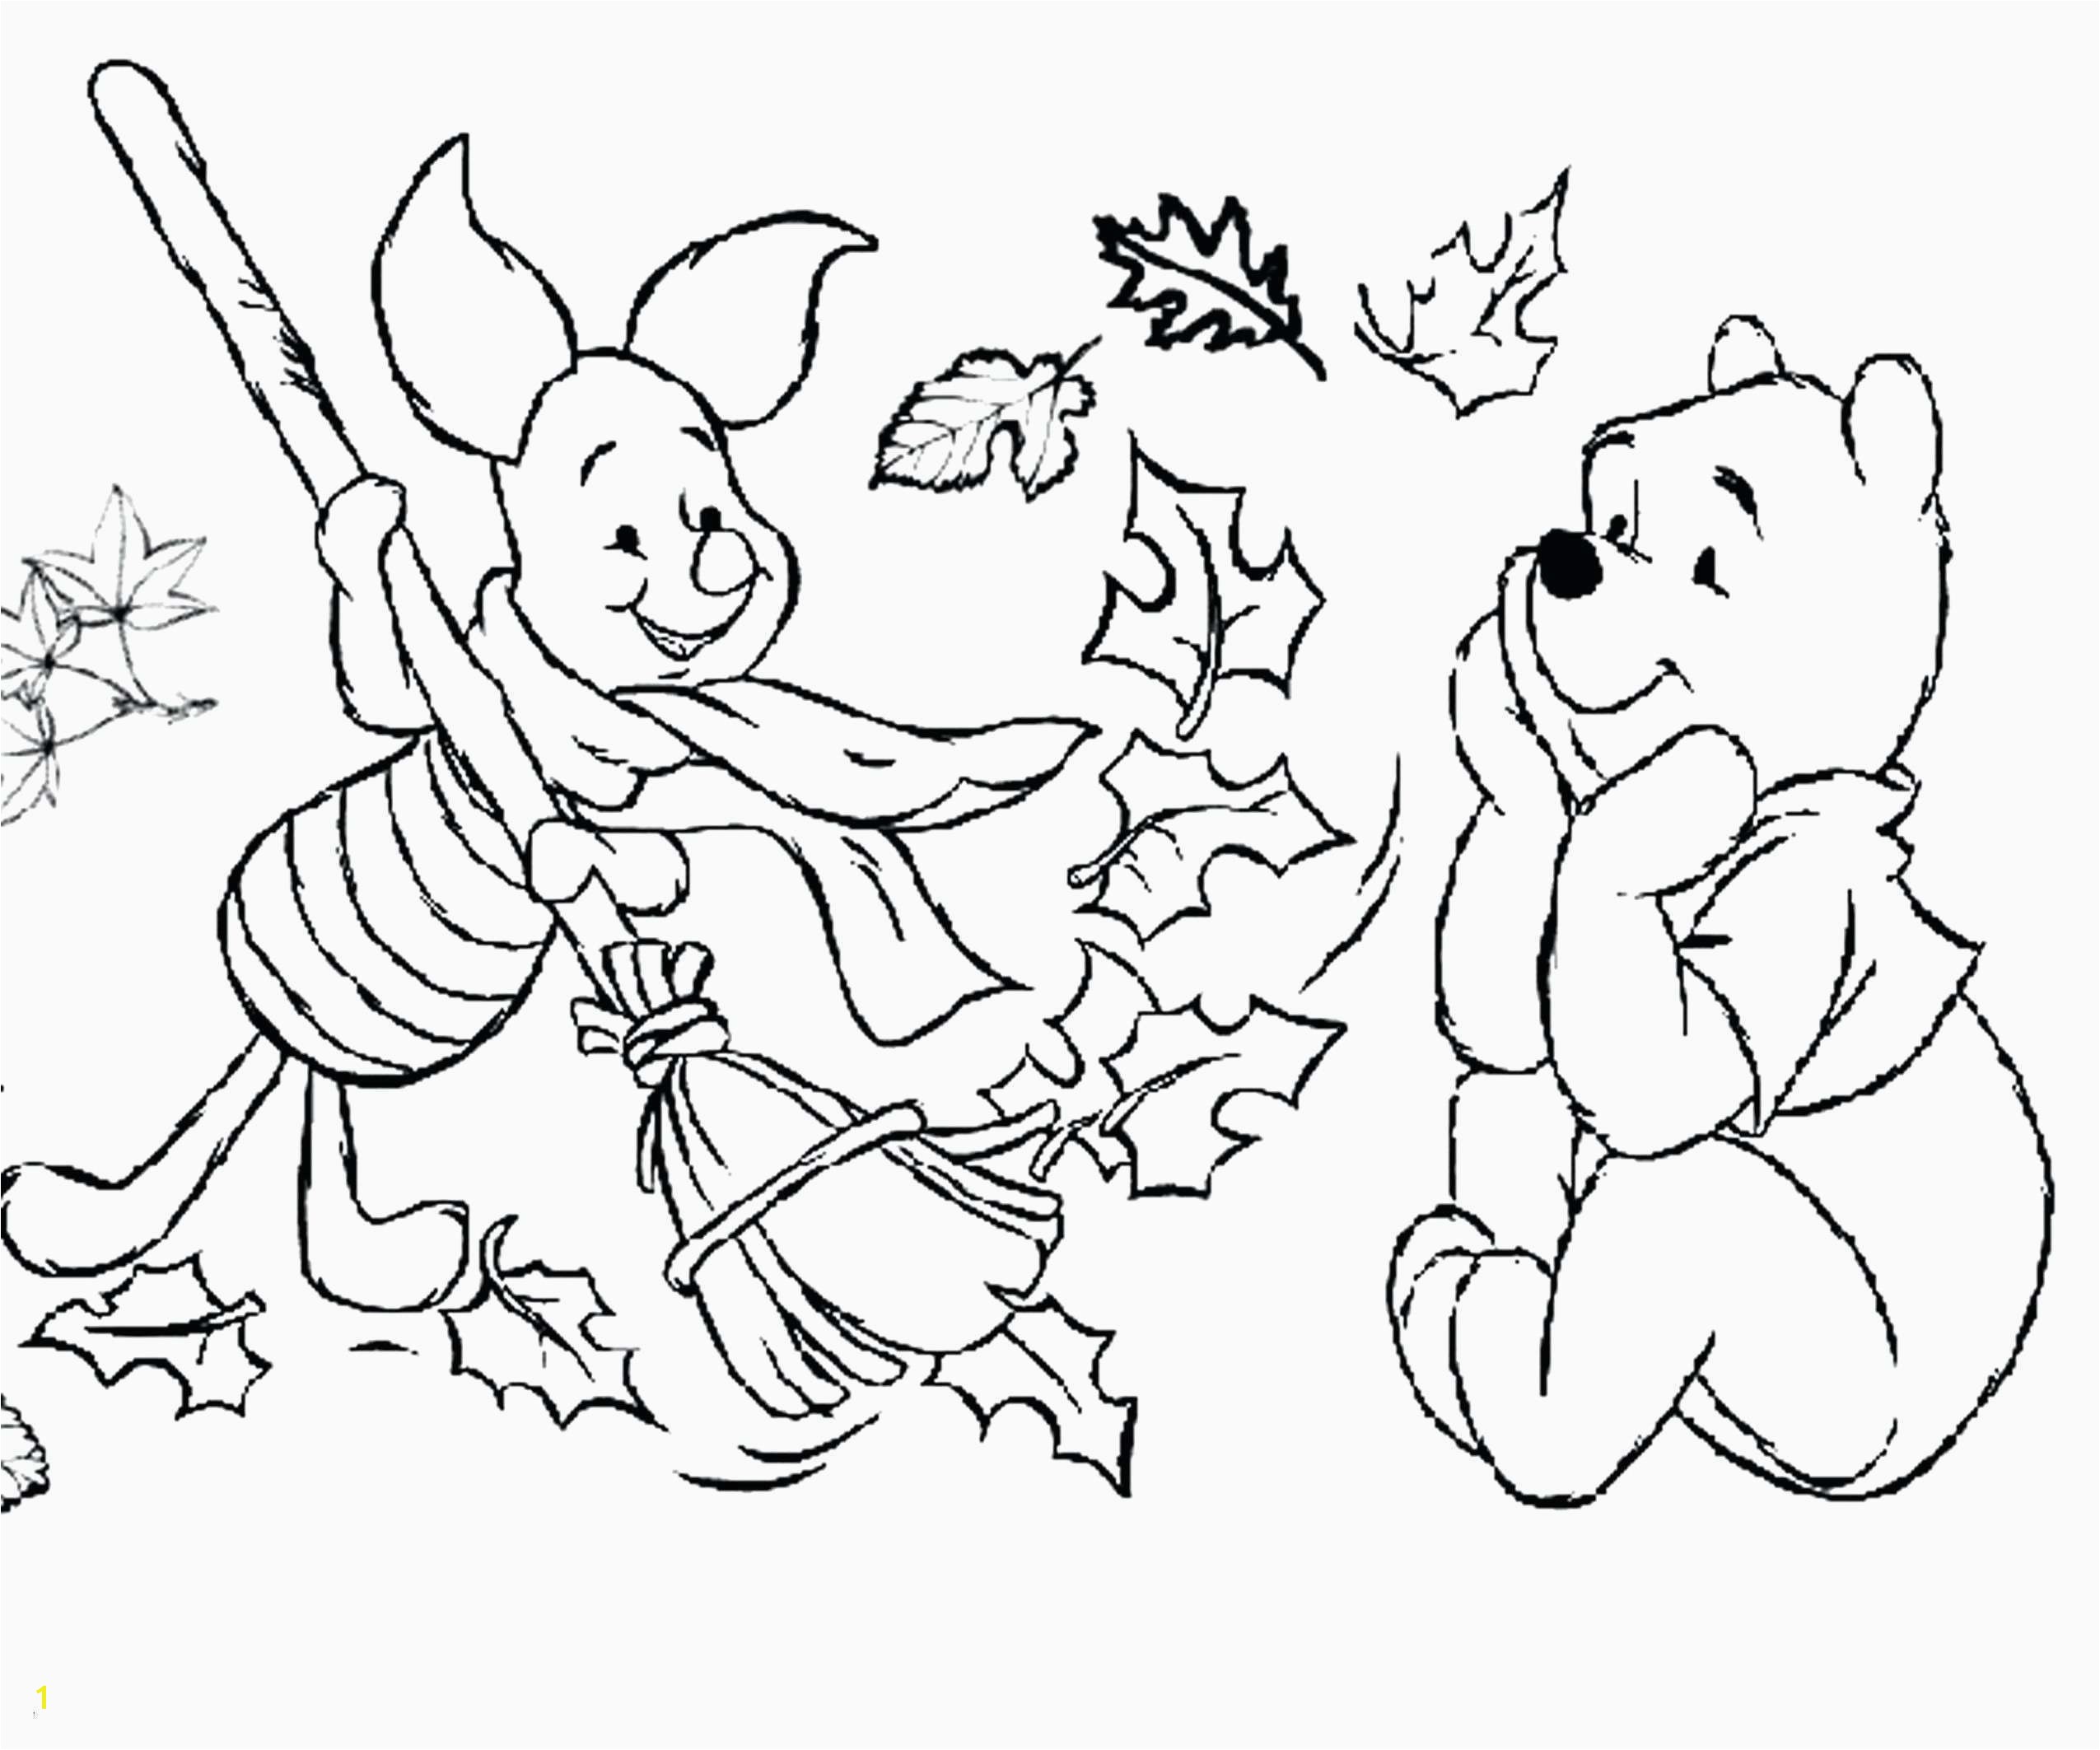 Moon Coloring Pages for Preschoolers 21 Disney Coloring Pages Princess Free Coloring Sheets